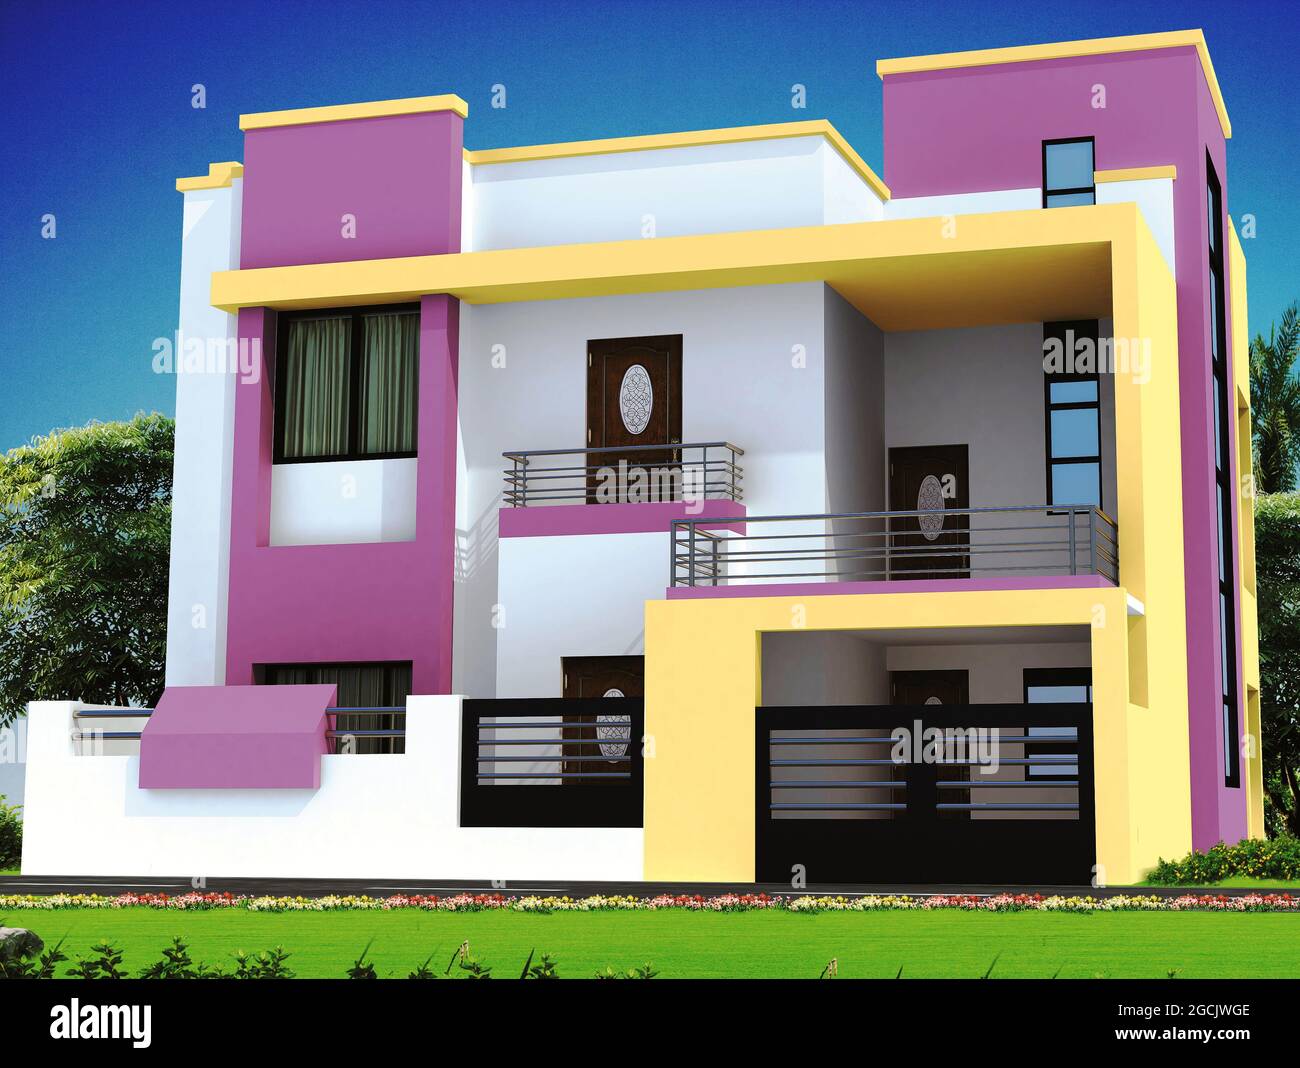 3D rendering of a big duplex house with a colorful abstract design ...